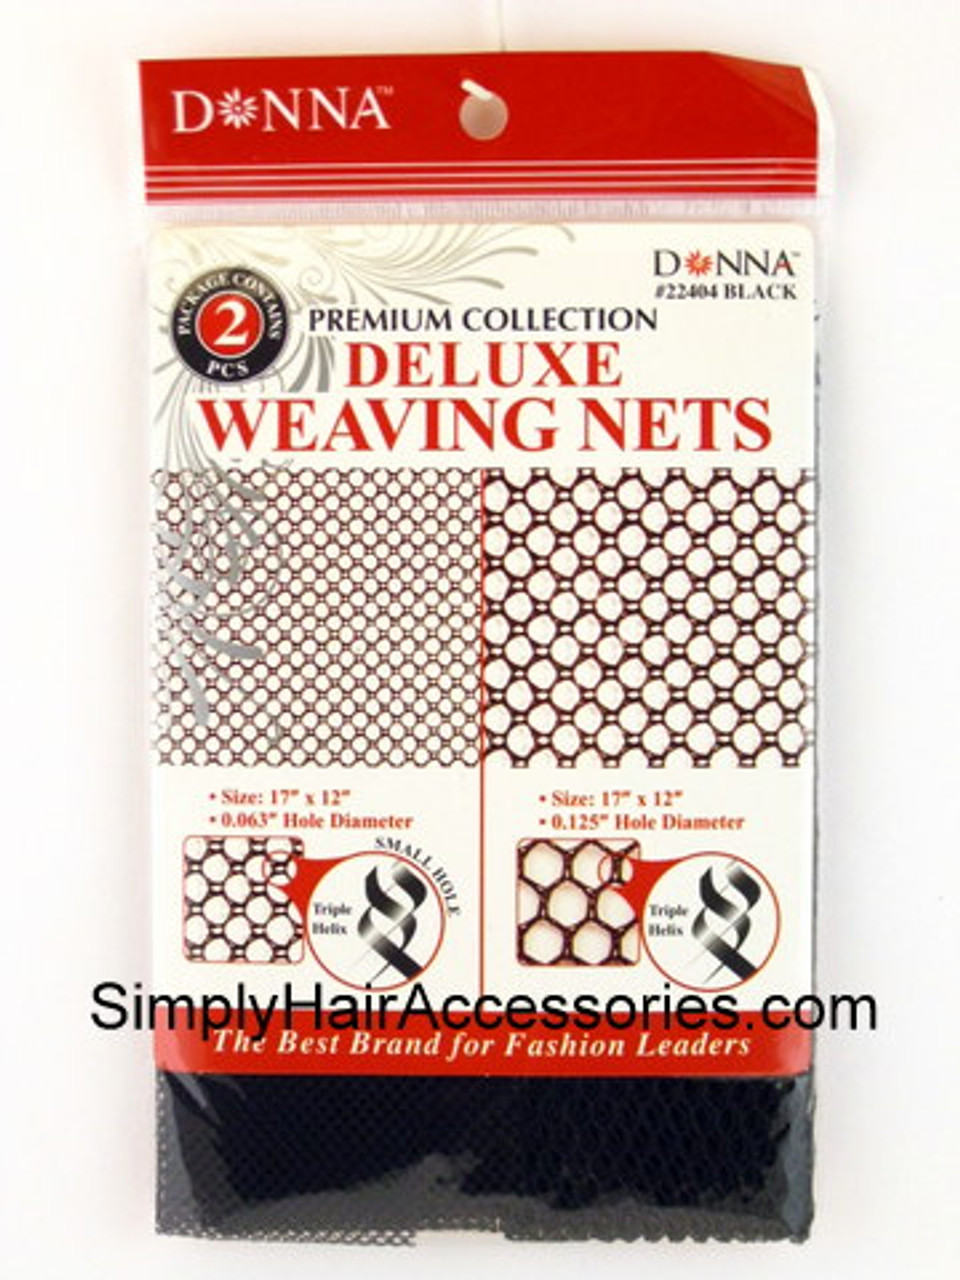 Donna Premium Collection Deluxe Large & Small Hole Weaving Nets - Black - 2  Pcs.